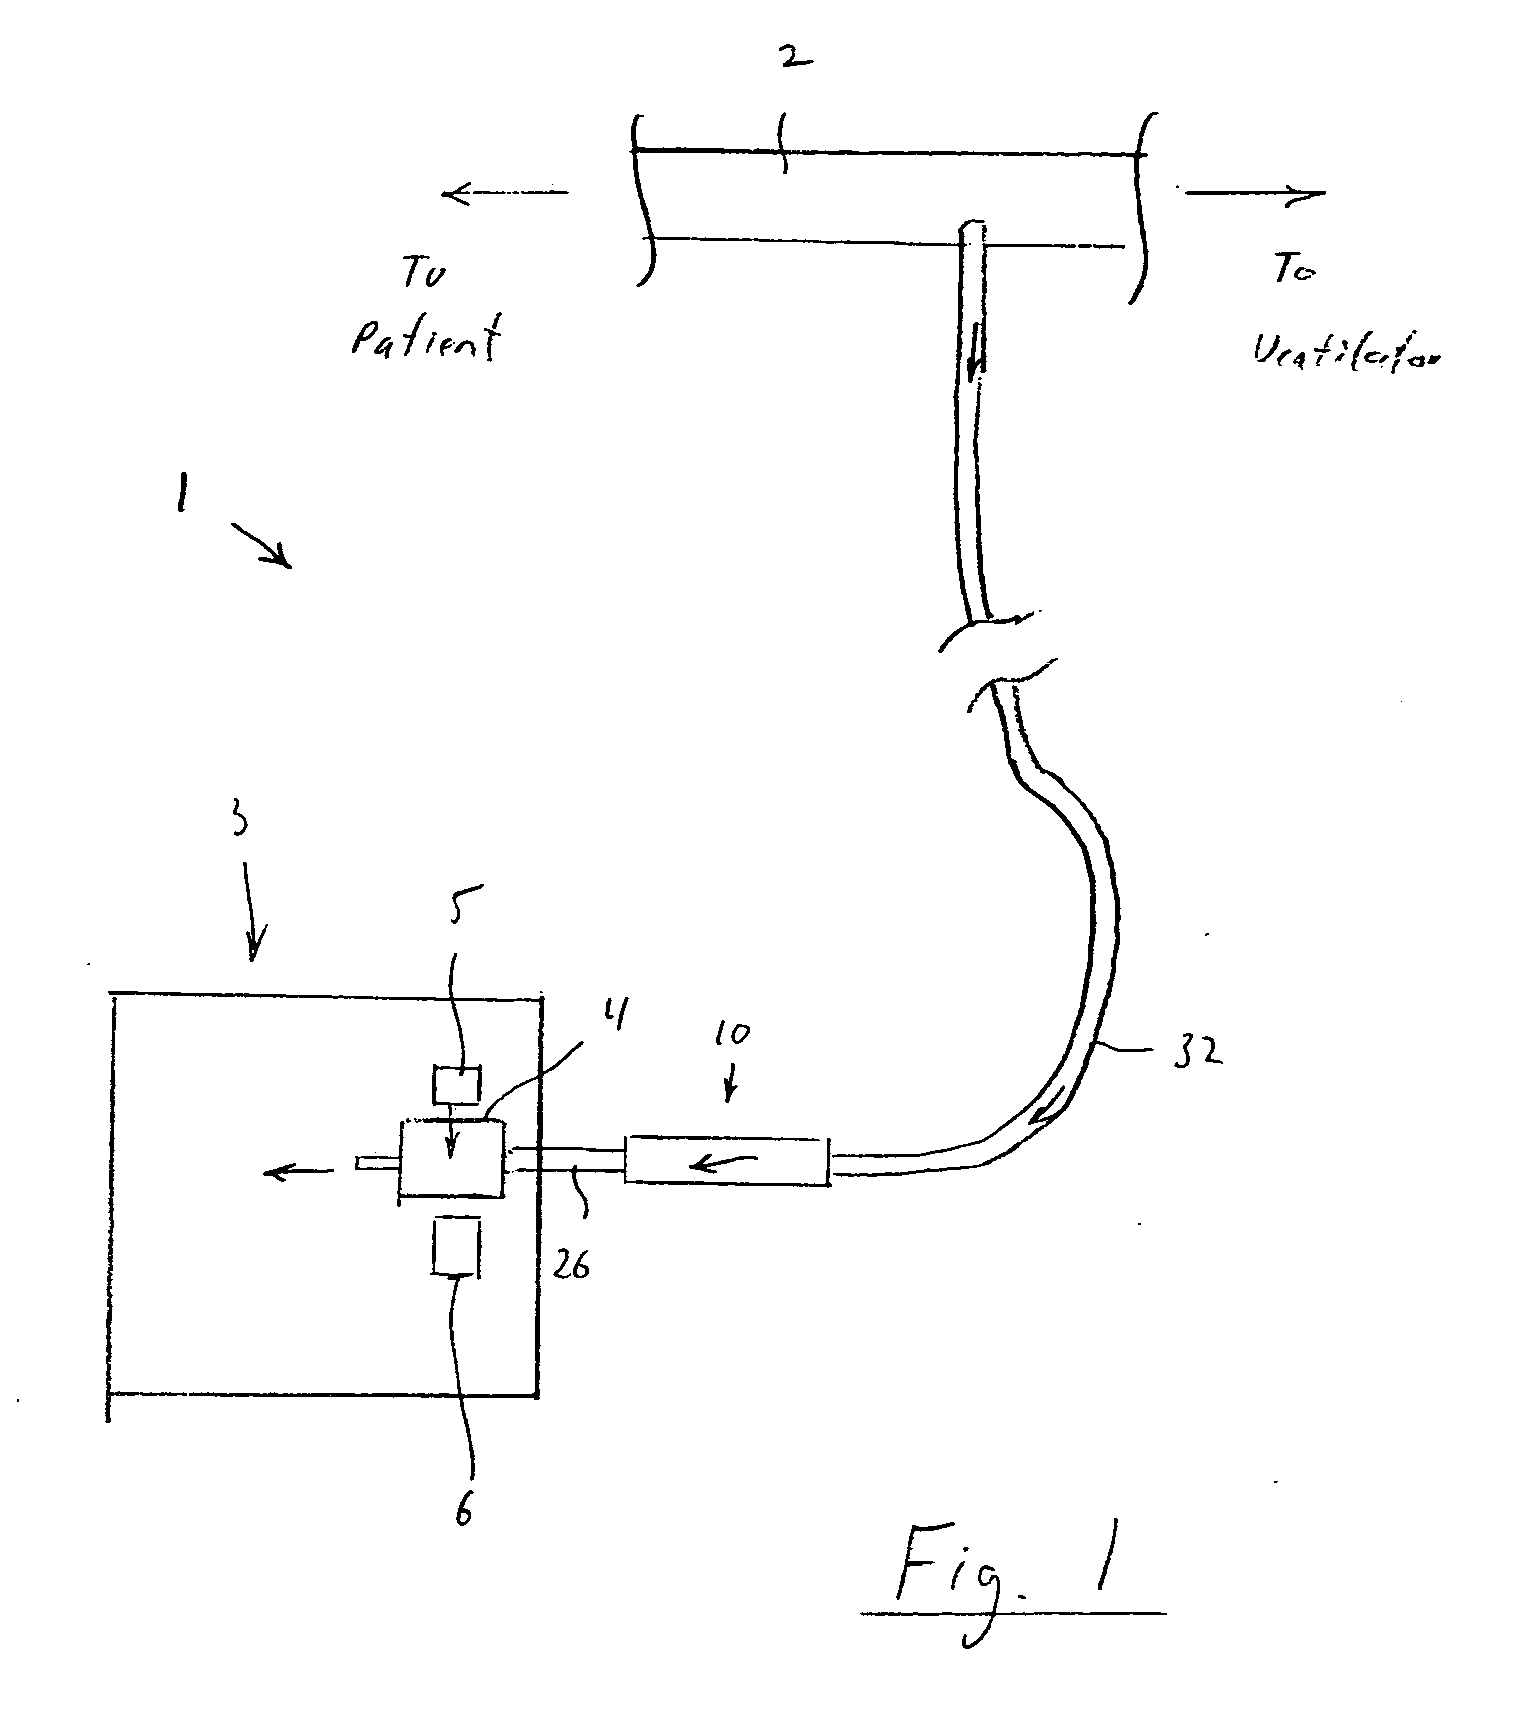 Liquid absorbing filter assembly and system using same